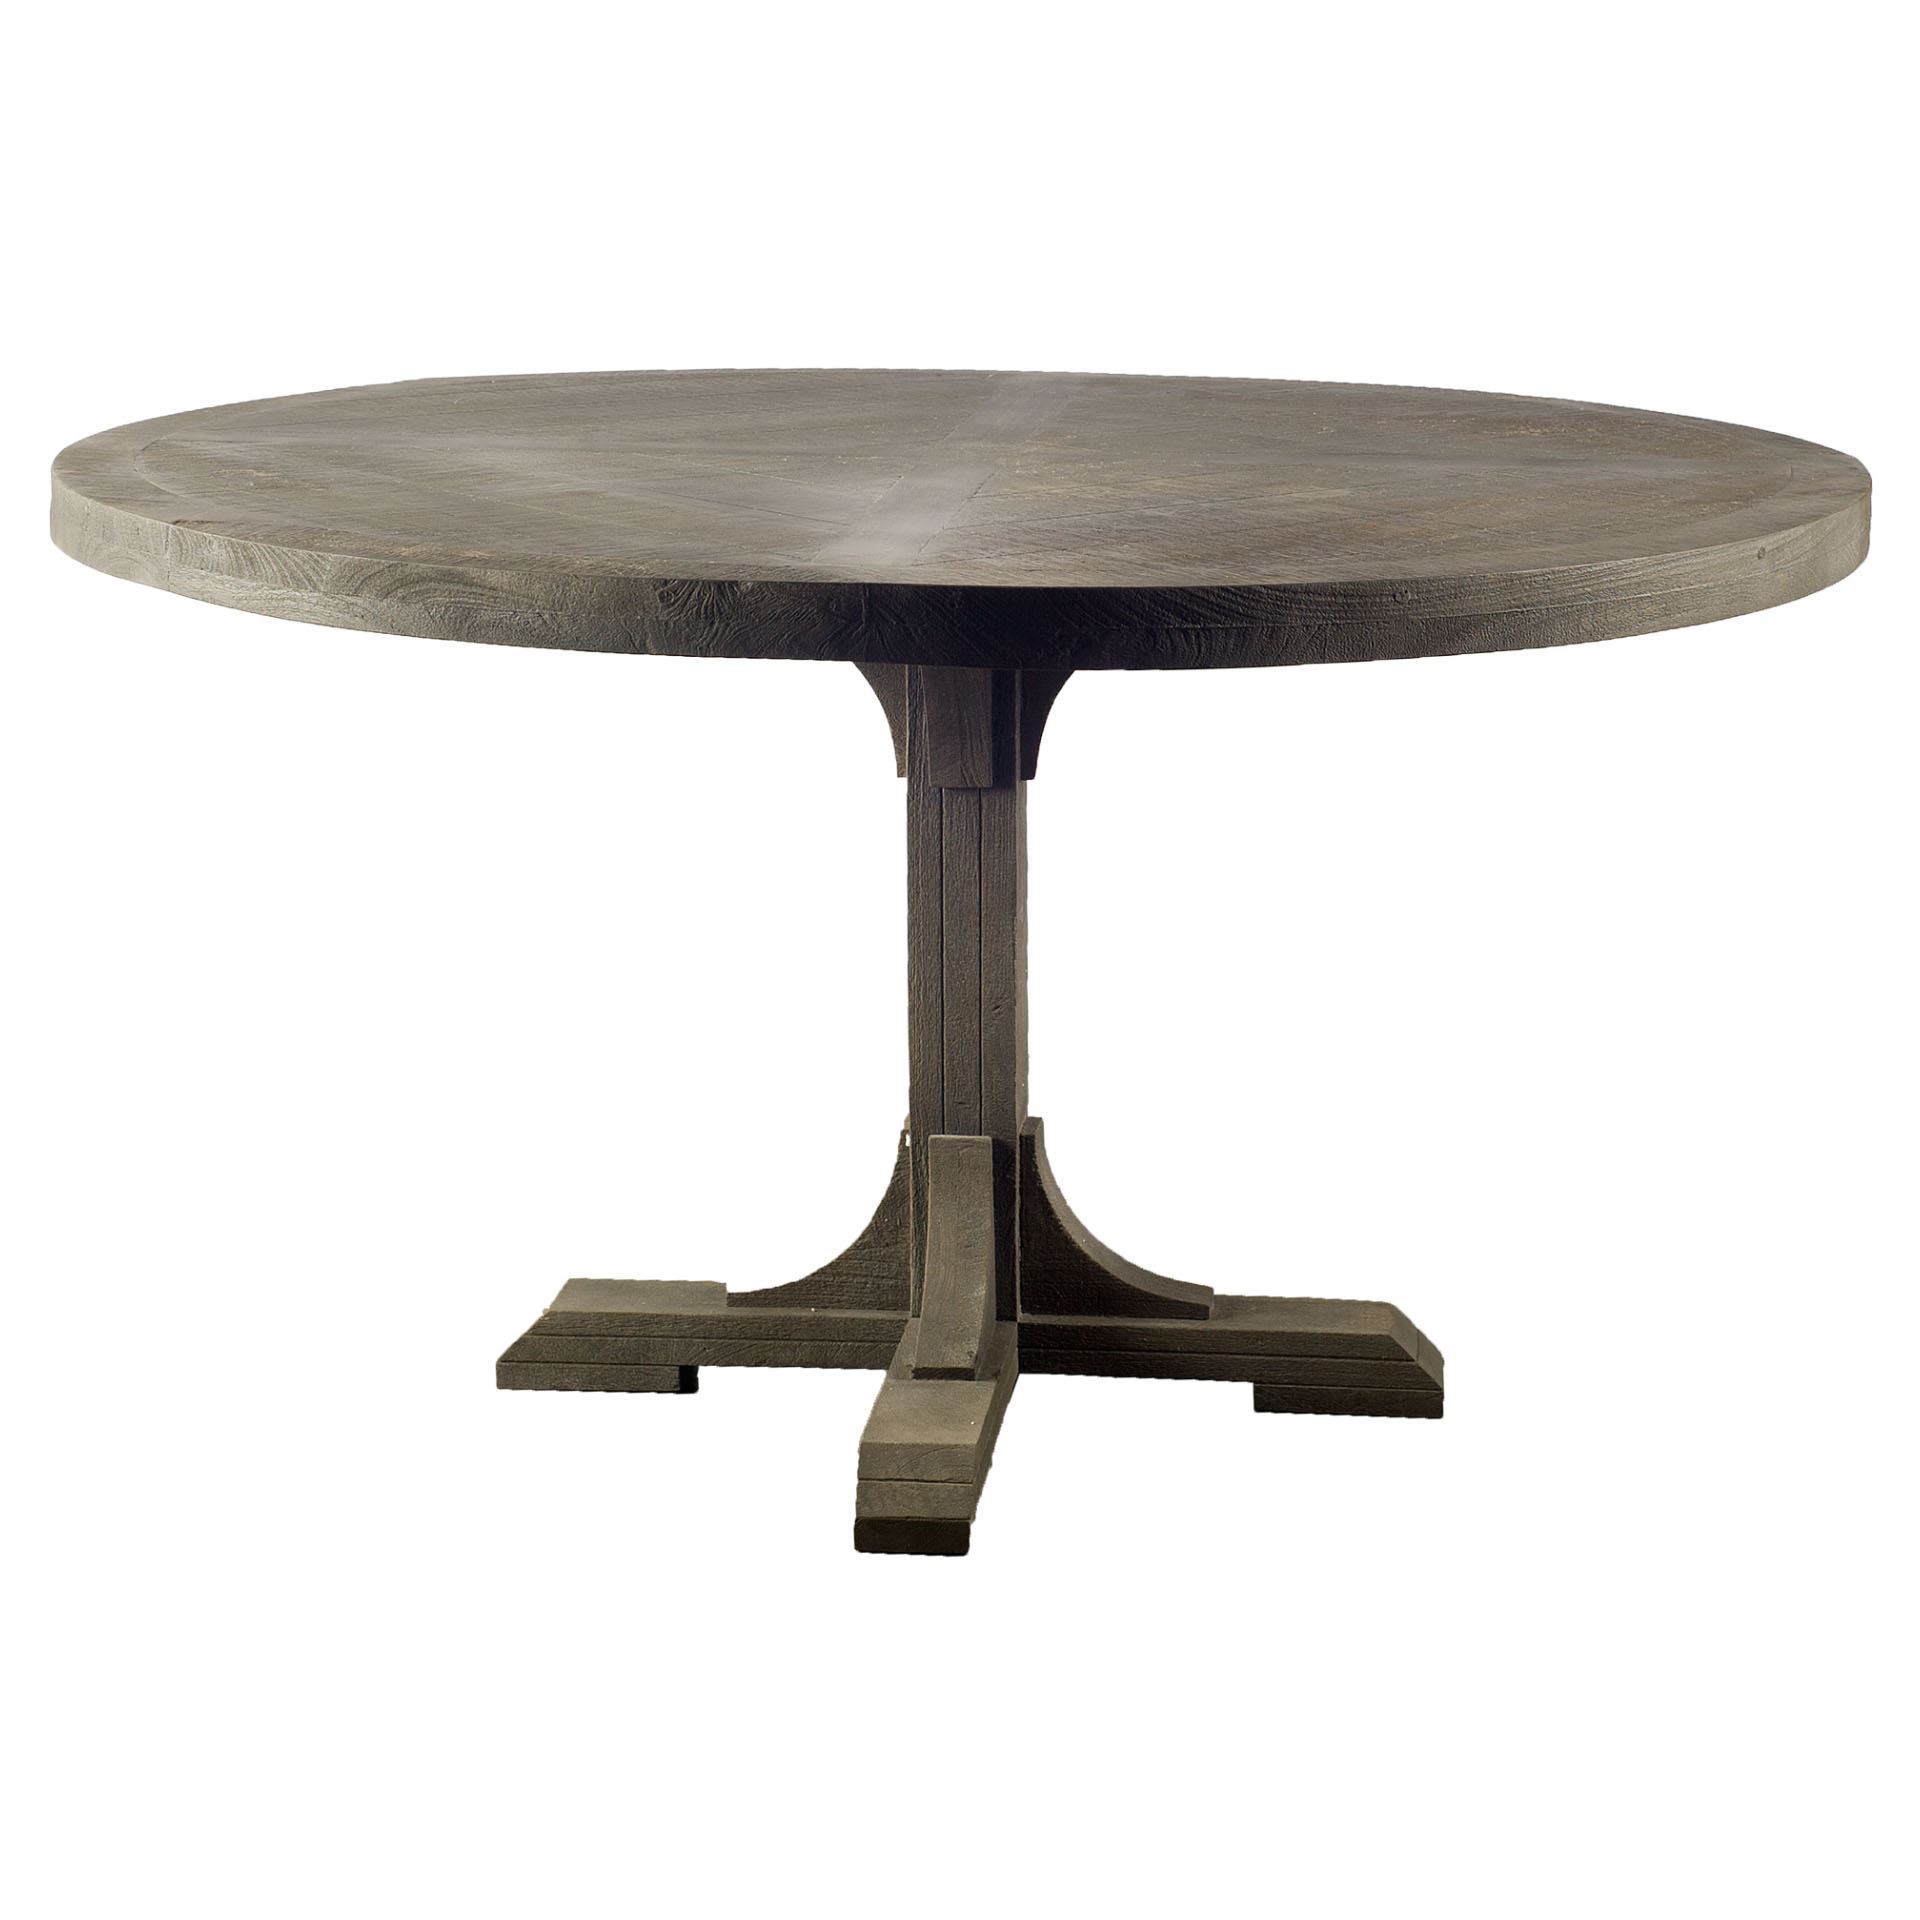 54" Circular Solid Wood Top with Pedestal Style Base Dining Table